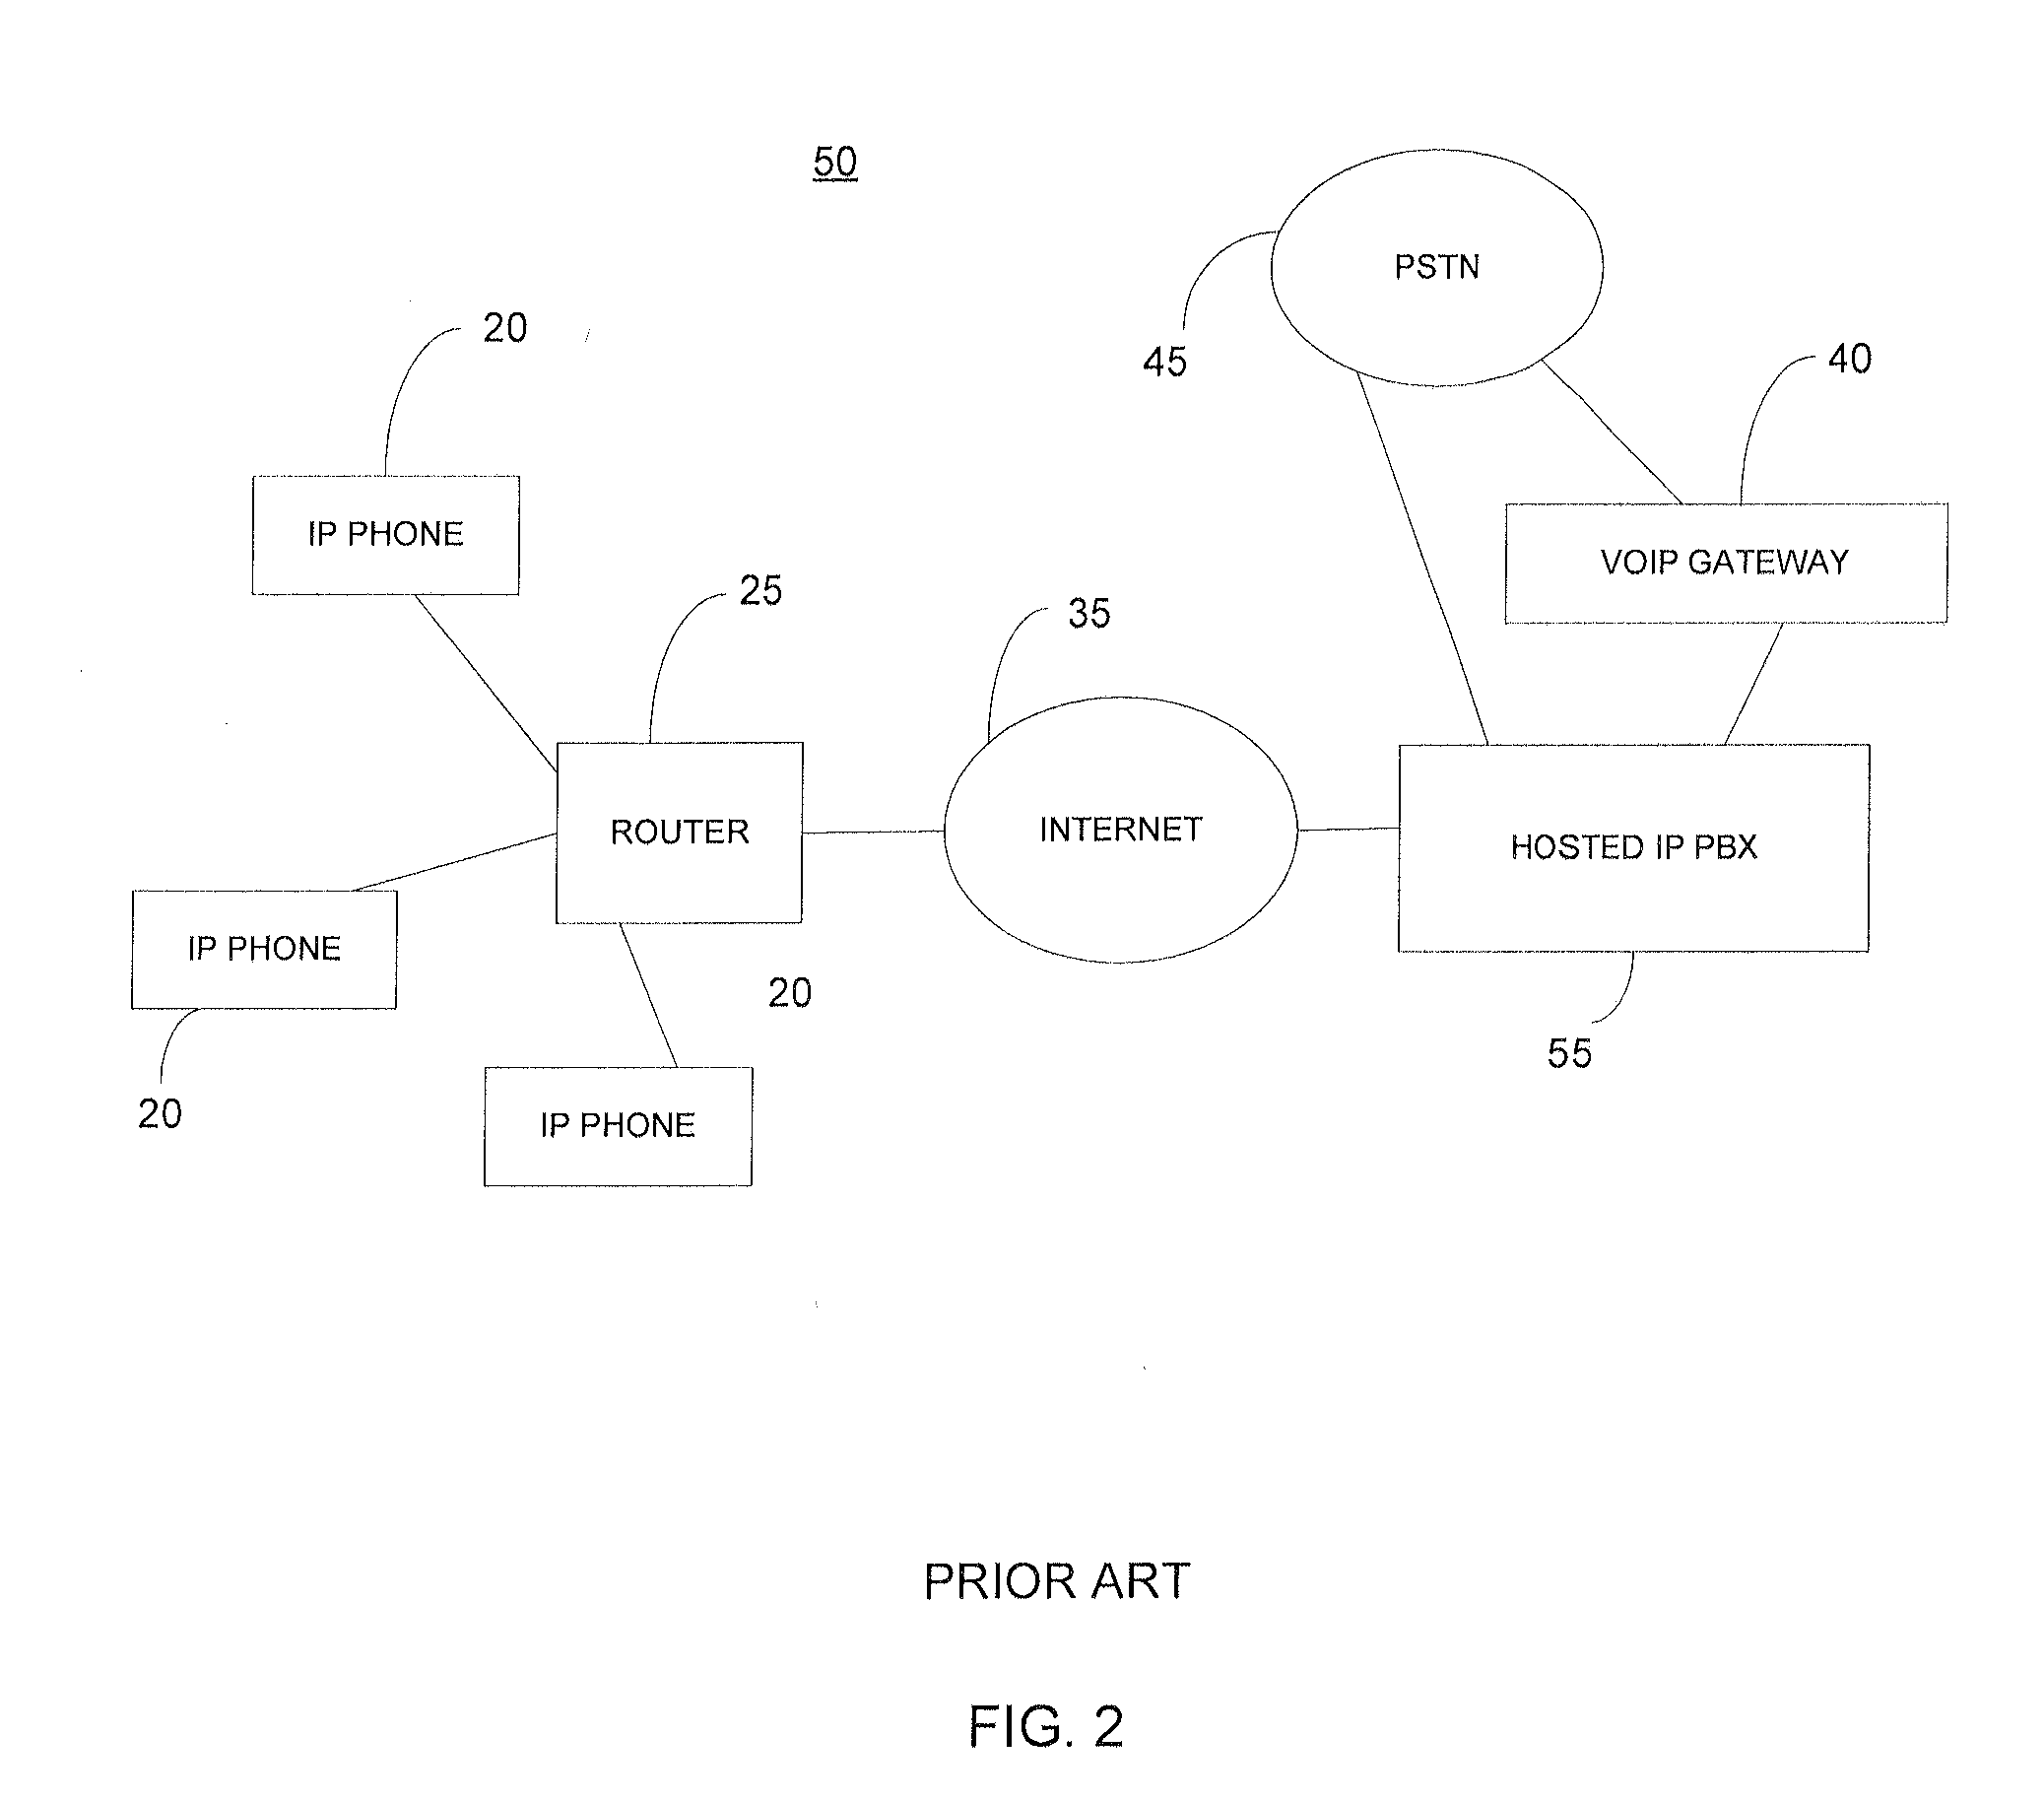 System and method for providing IP pbx service